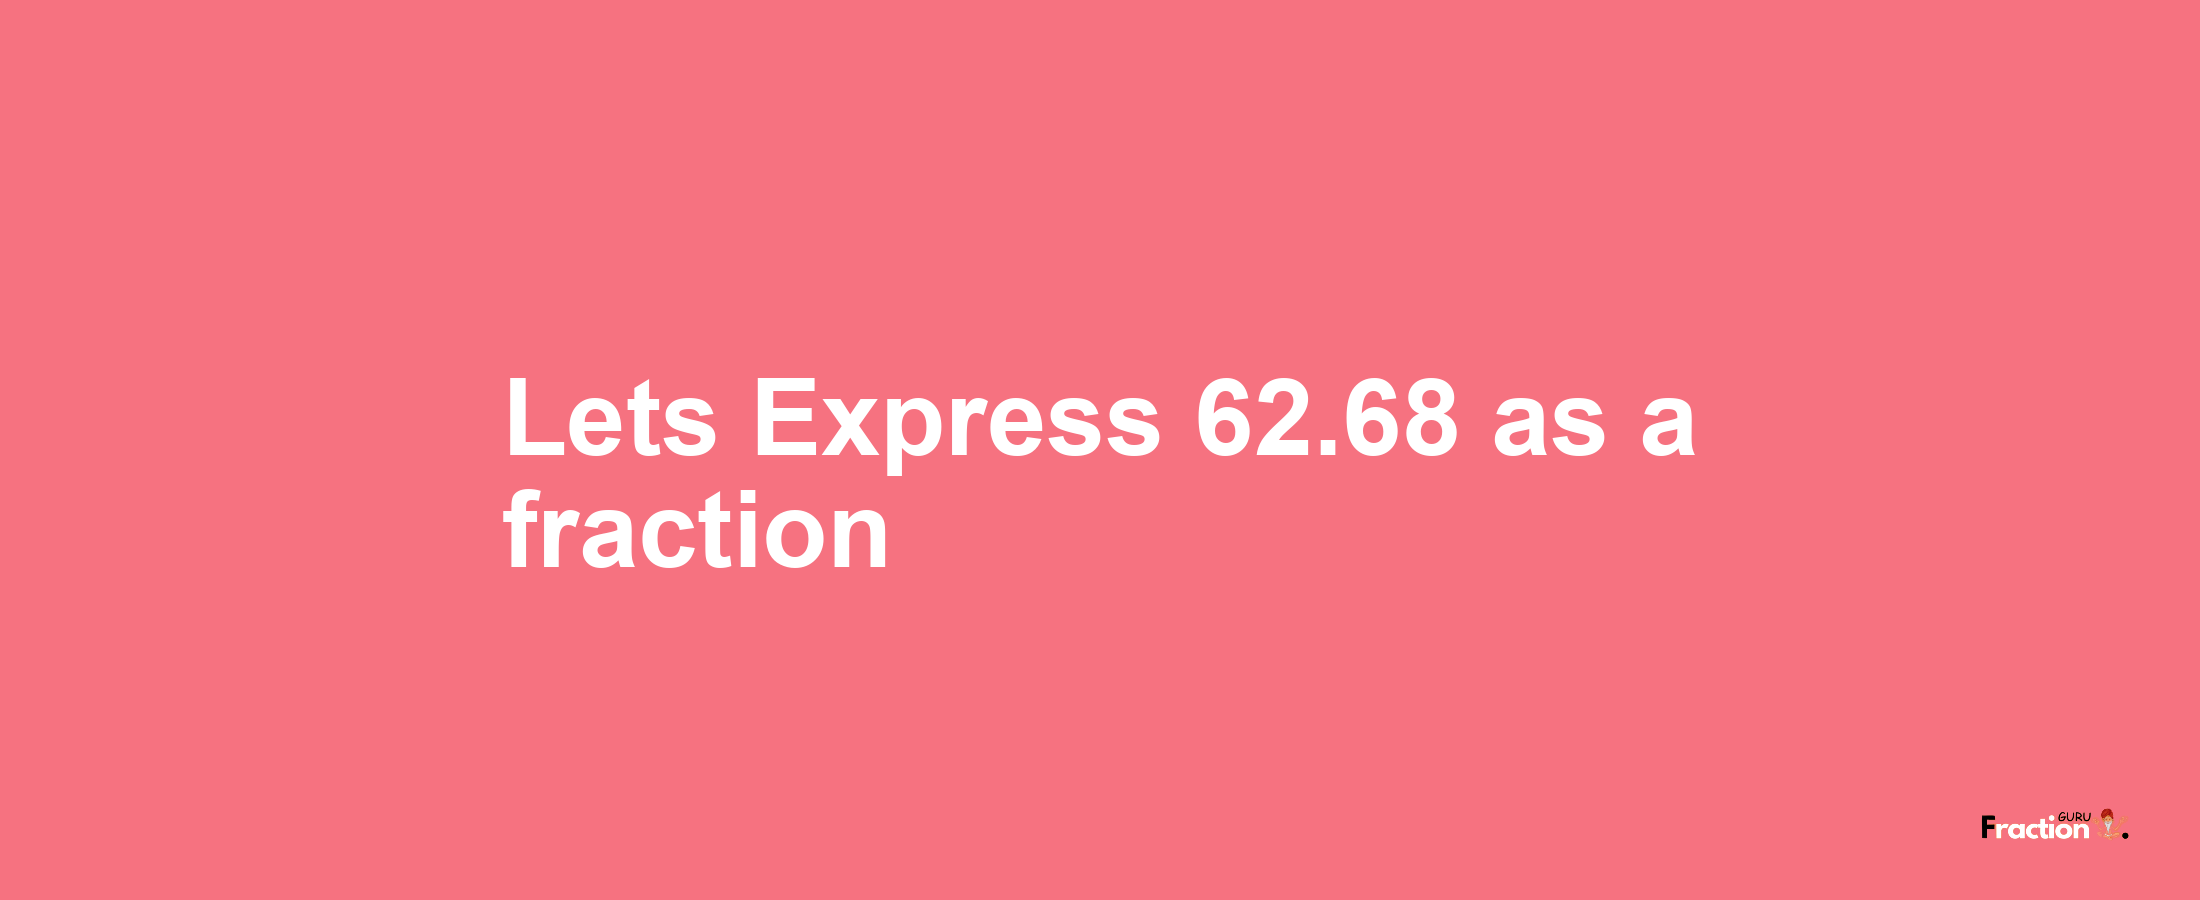 Lets Express 62.68 as afraction